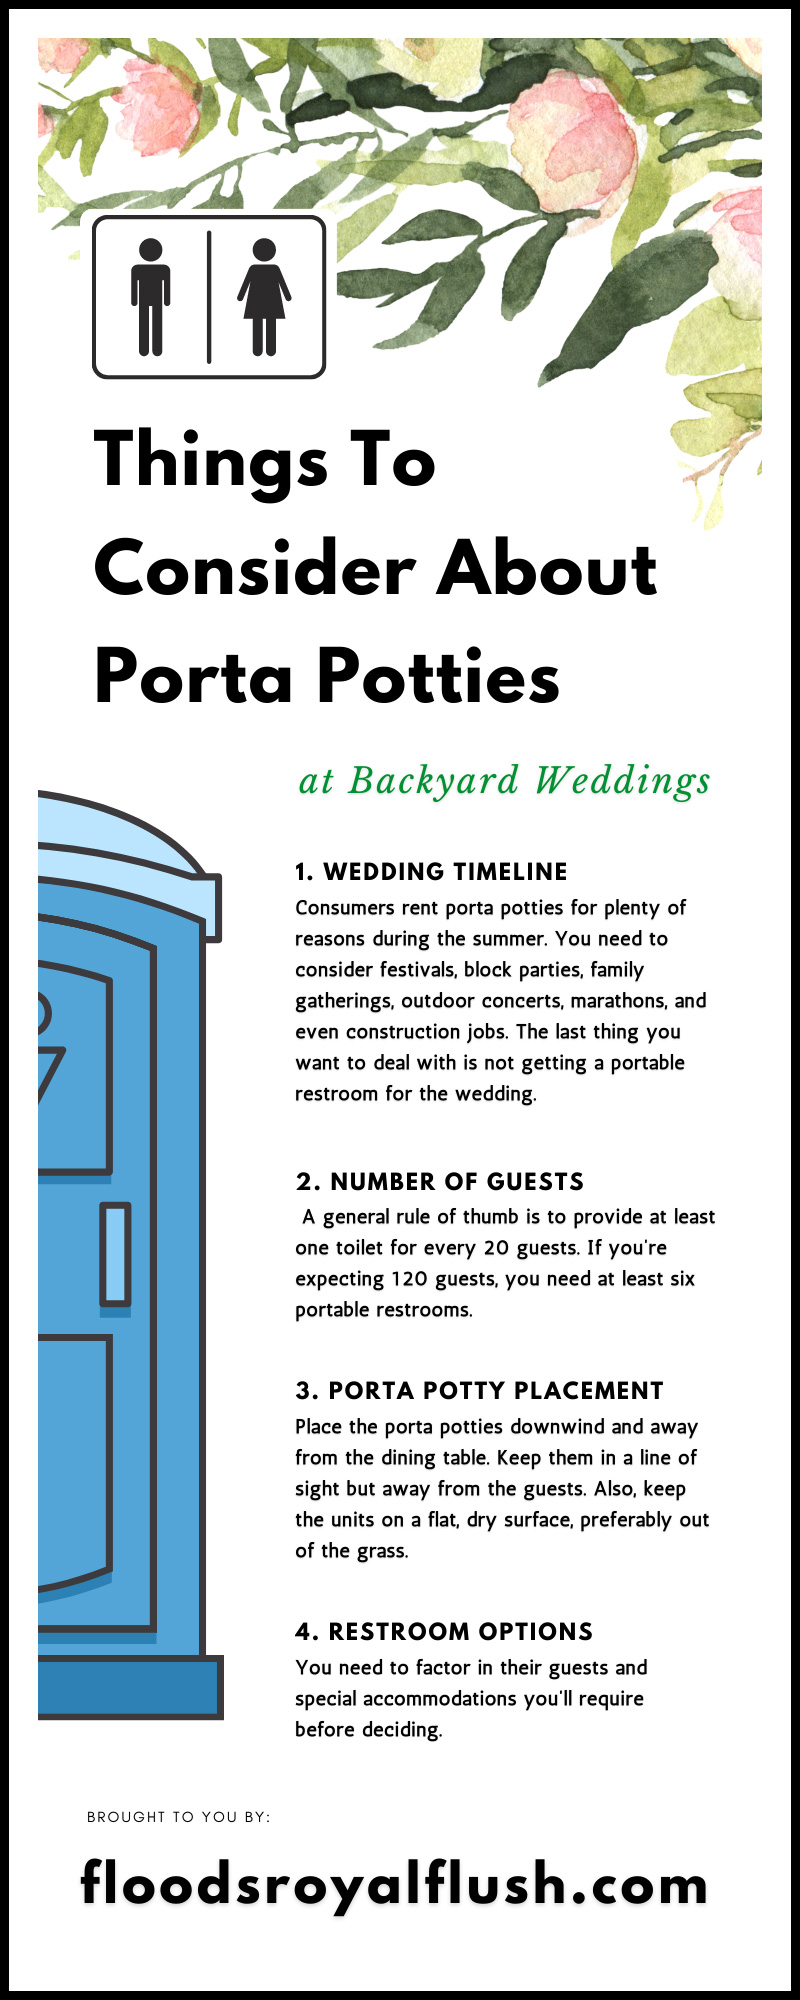 Things To Consider About Porta Potties at Backyard Weddings
